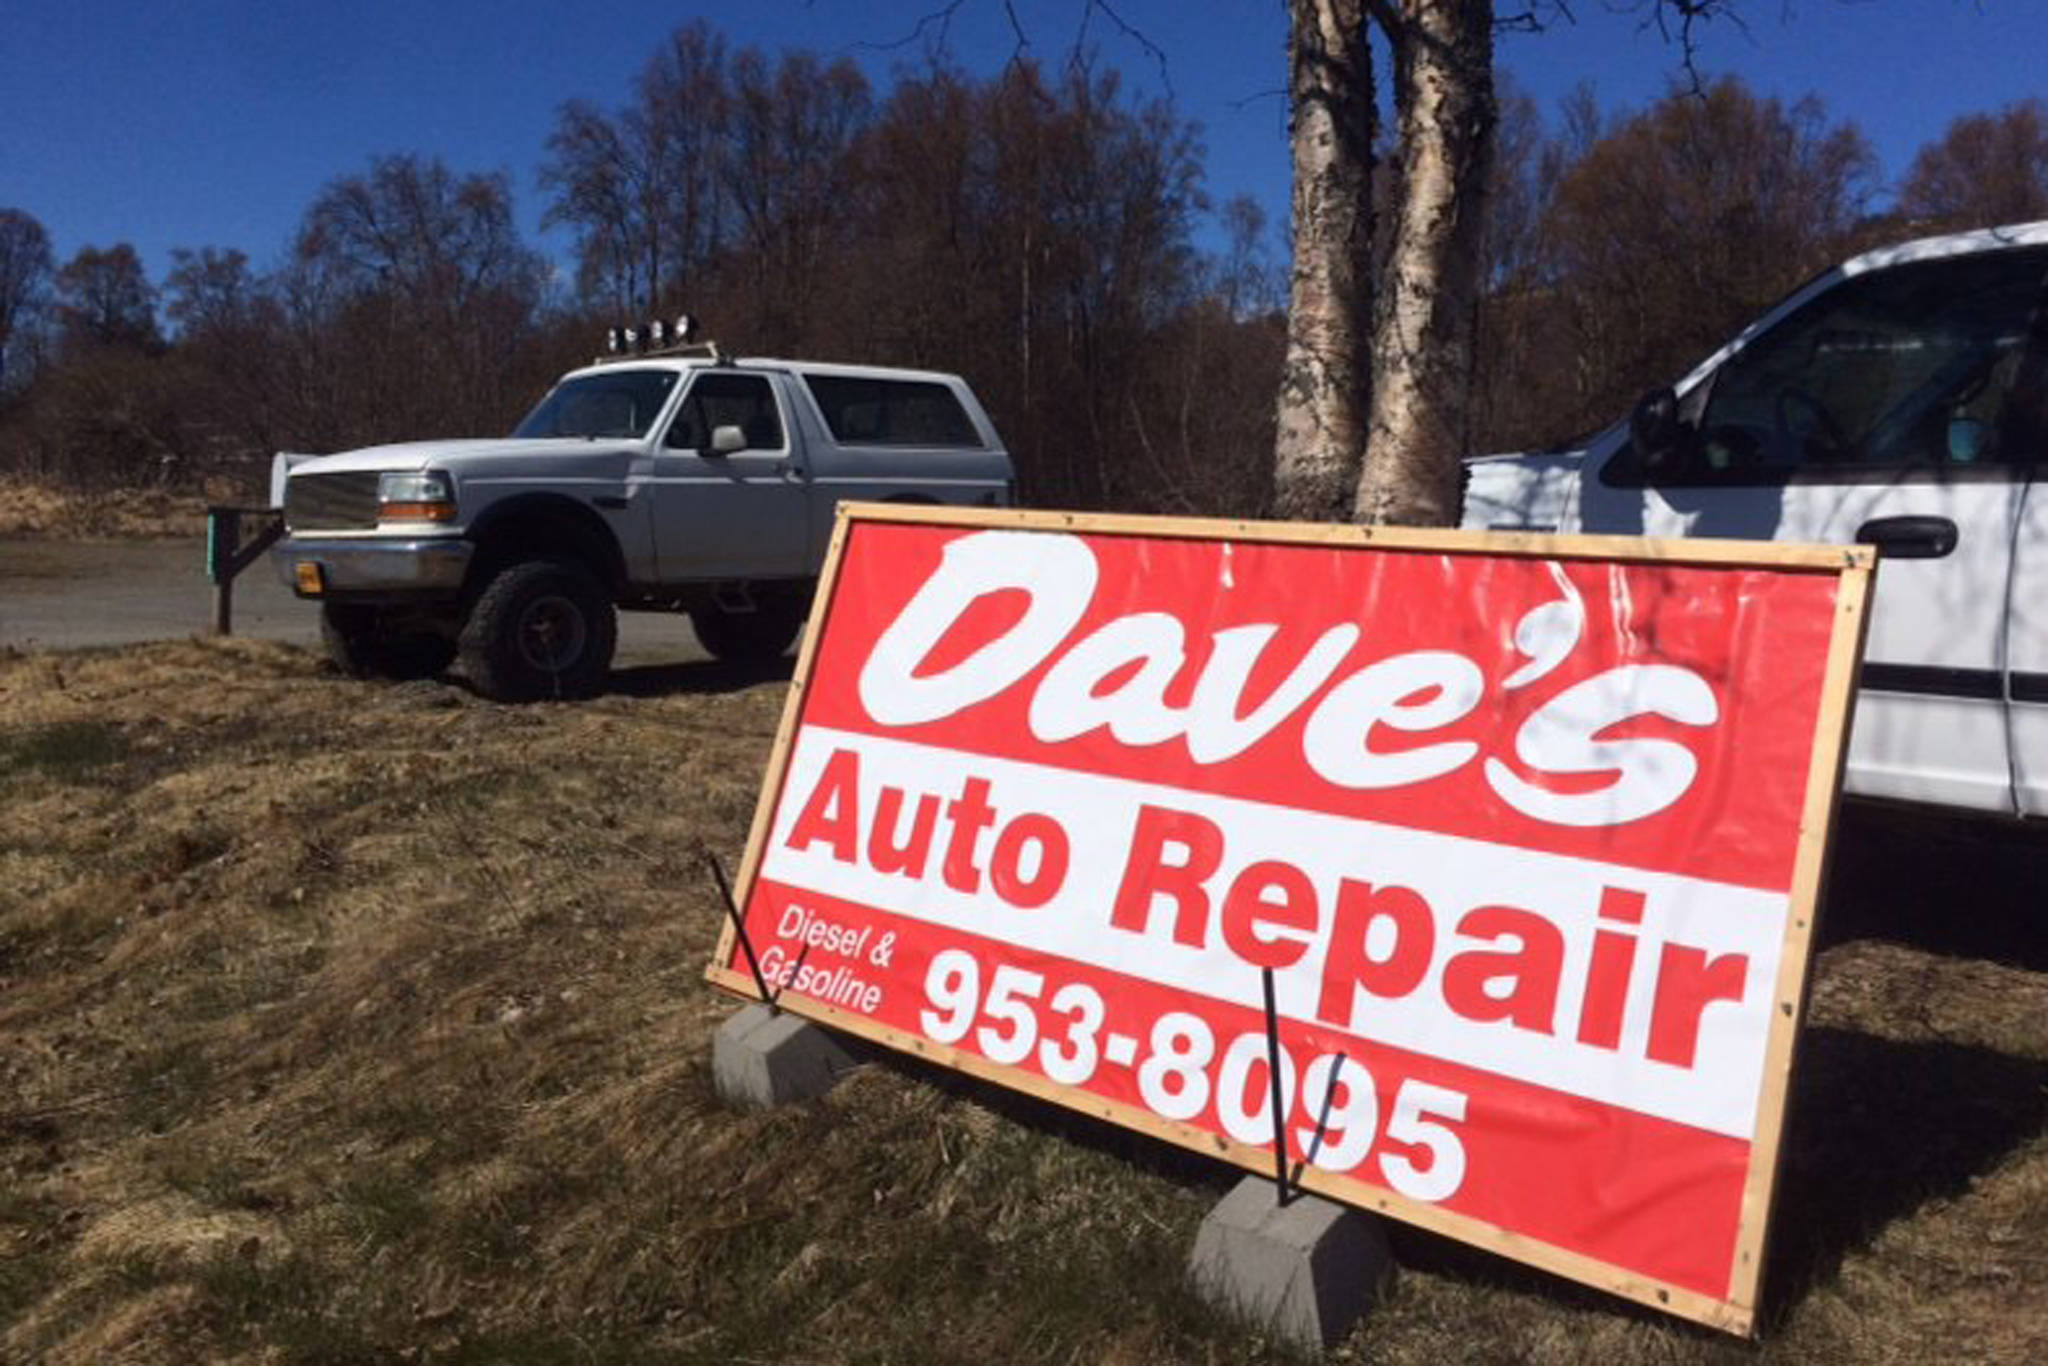 Dave’s Auto Repair, shown here on Friday, April 26, 2019 just outside Homer, Alaska, was targeted with racist vandalism. Owner Dave Johnson discovered the vandalism Friday morning. (Photo courtesy Dave Johnson)